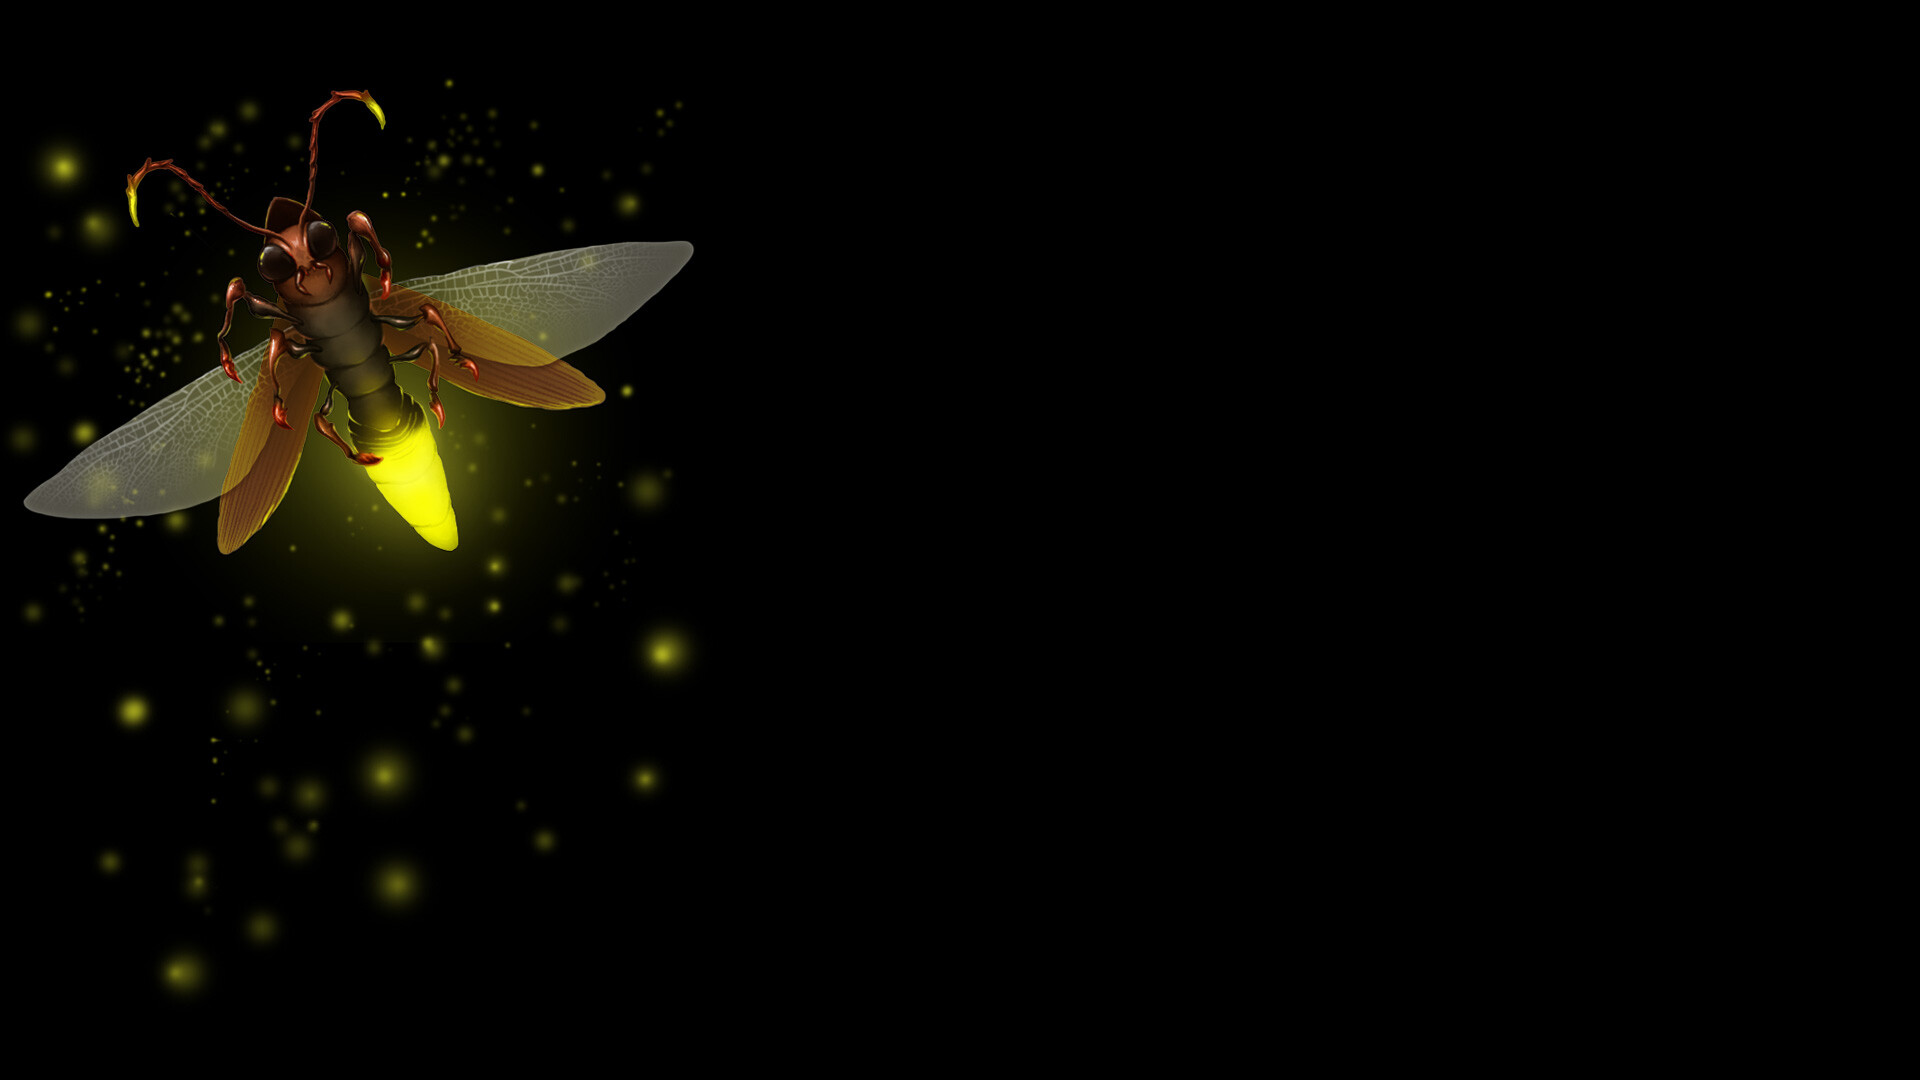 Firefly (Insect): Beetles that use “cold light” to attract mates, Bioluminescence. 1920x1080 Full HD Wallpaper.